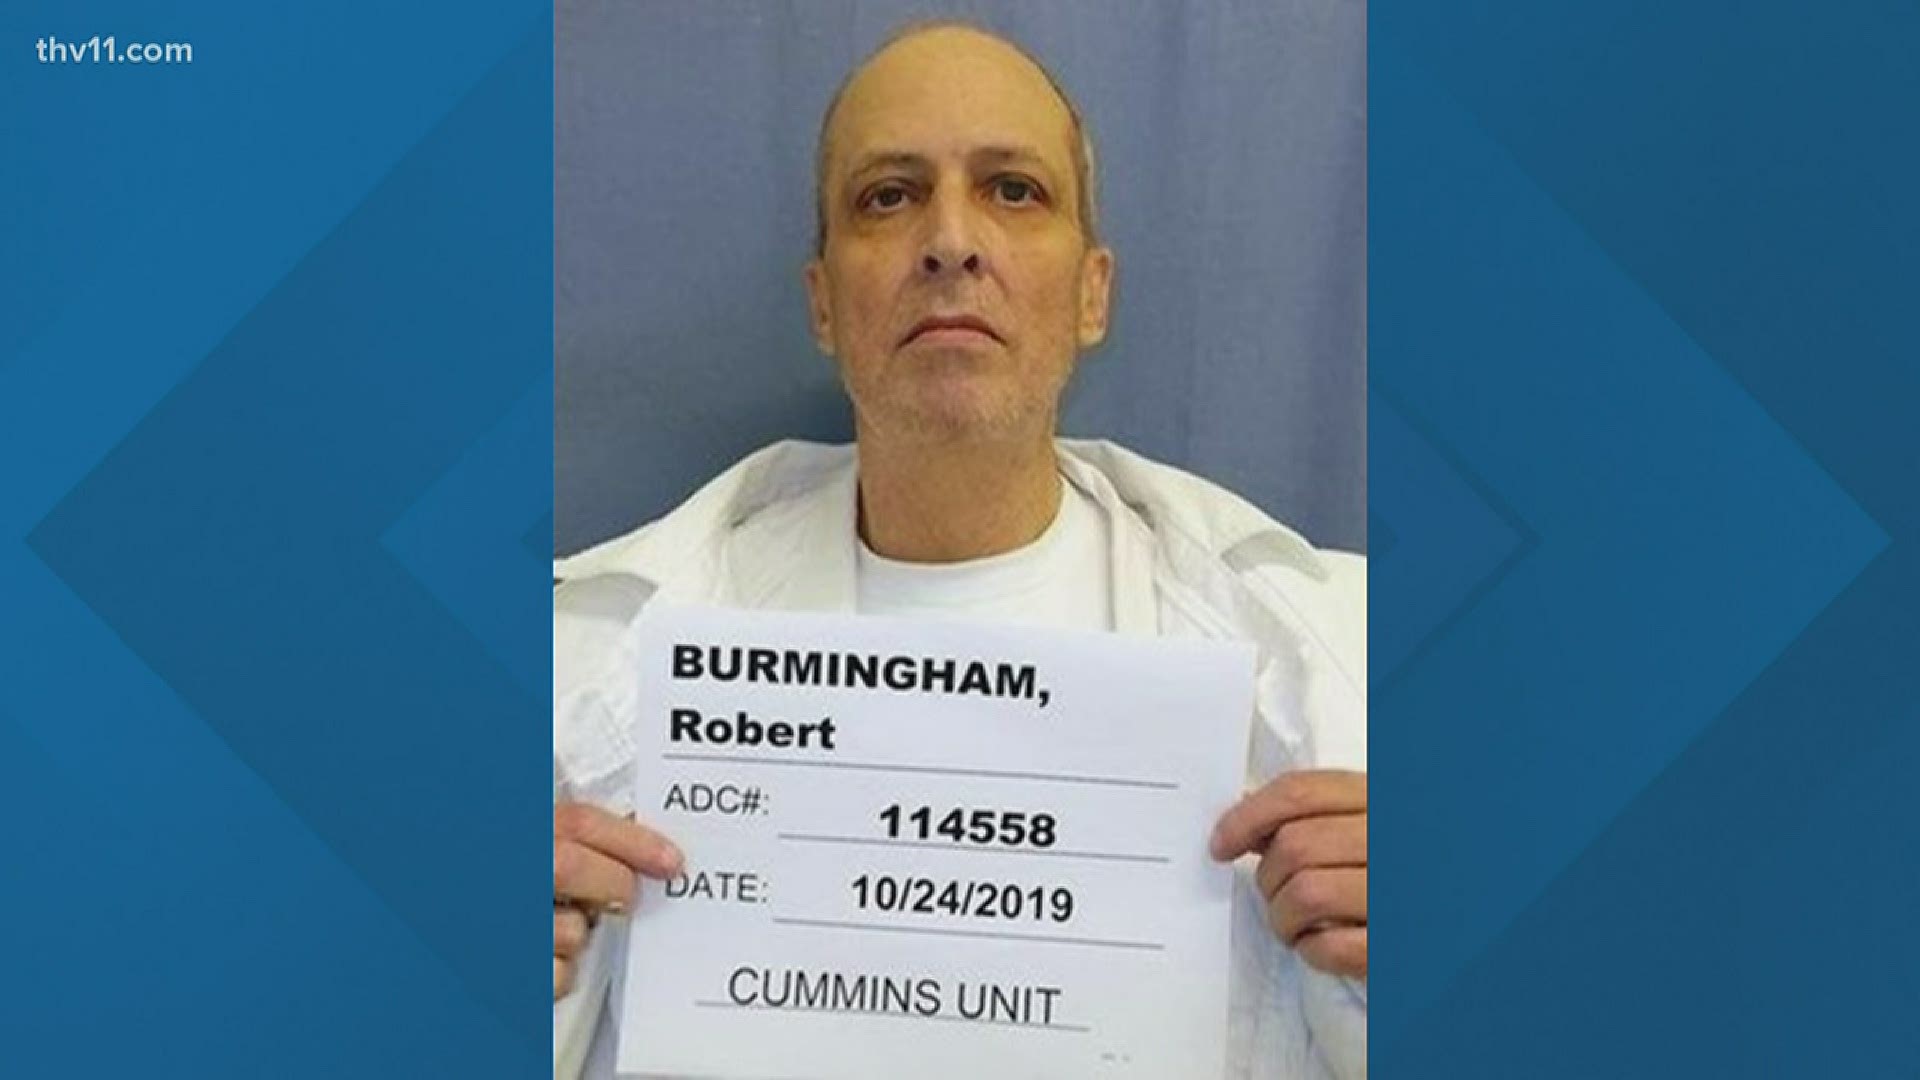 Governor Asa Hutchinson confirmed one of the Cummins prison inmates who died from COVID-19 was Robert Burmingham, also known as the "Blue Light Rapist."